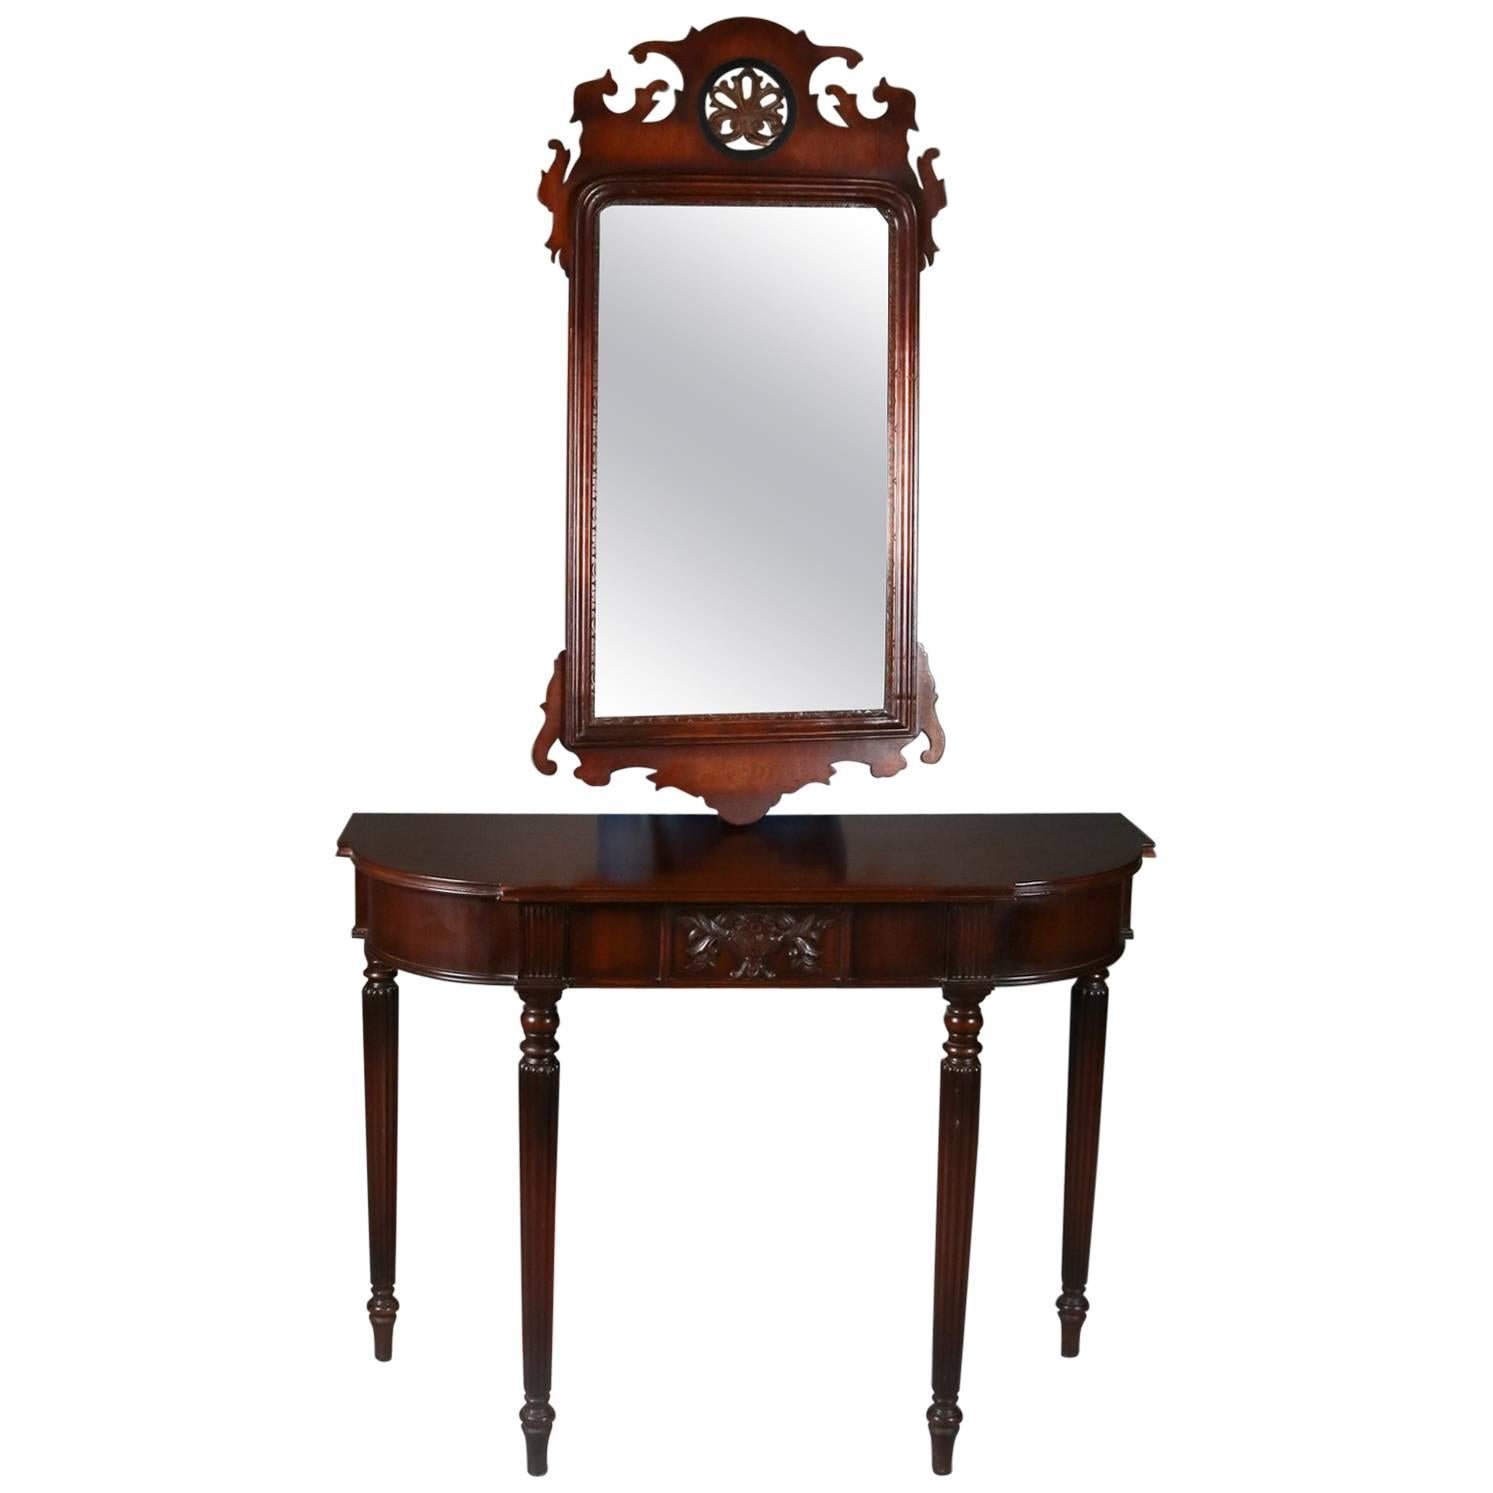 Carved Mahogany Console Table with Mirror by Elgin Simonds Co., circa 1900